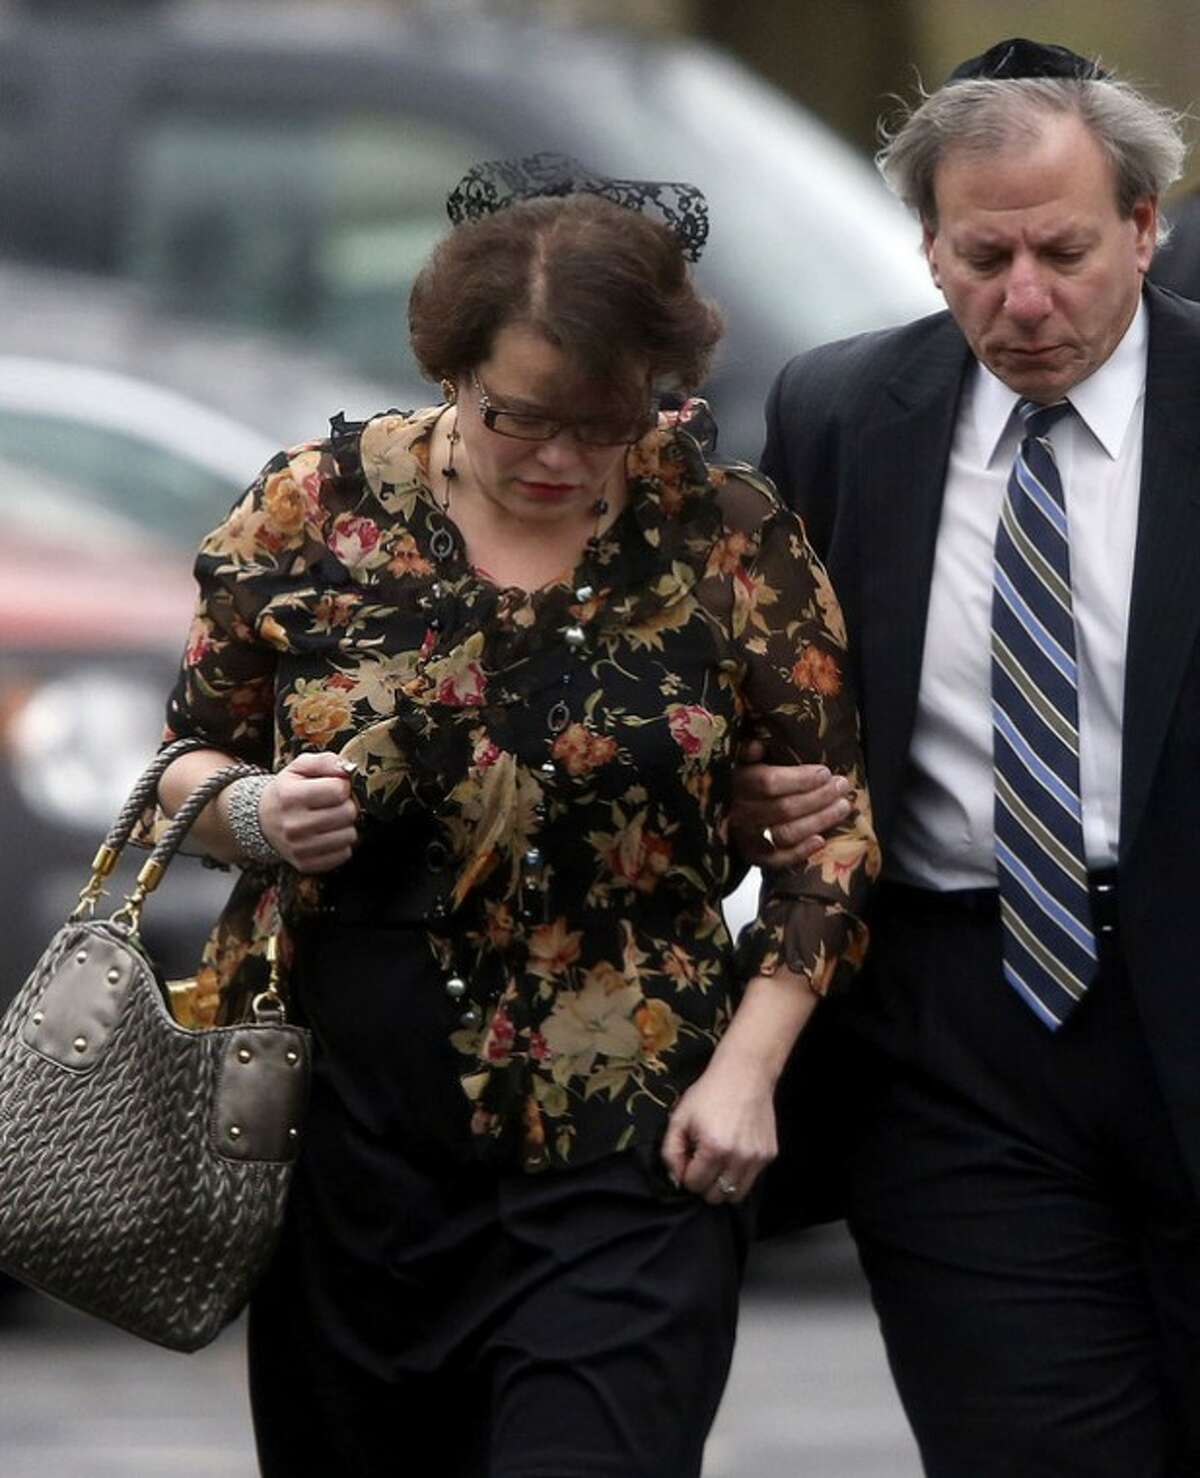 Veronique Pozner is escorted to her car after a funeral service for her 6-year-old son Noah Pozner, Monday, Dec. 17, 2012, in Fairfield, Conn. Noah Pozner was killed when gunman Adam Lanza walked into Sandy Hook Elementary School in Newtown Friday and opened fire, killing 26 people, including 20 children, before killing himself. (AP Photo/Jason DeCrow)